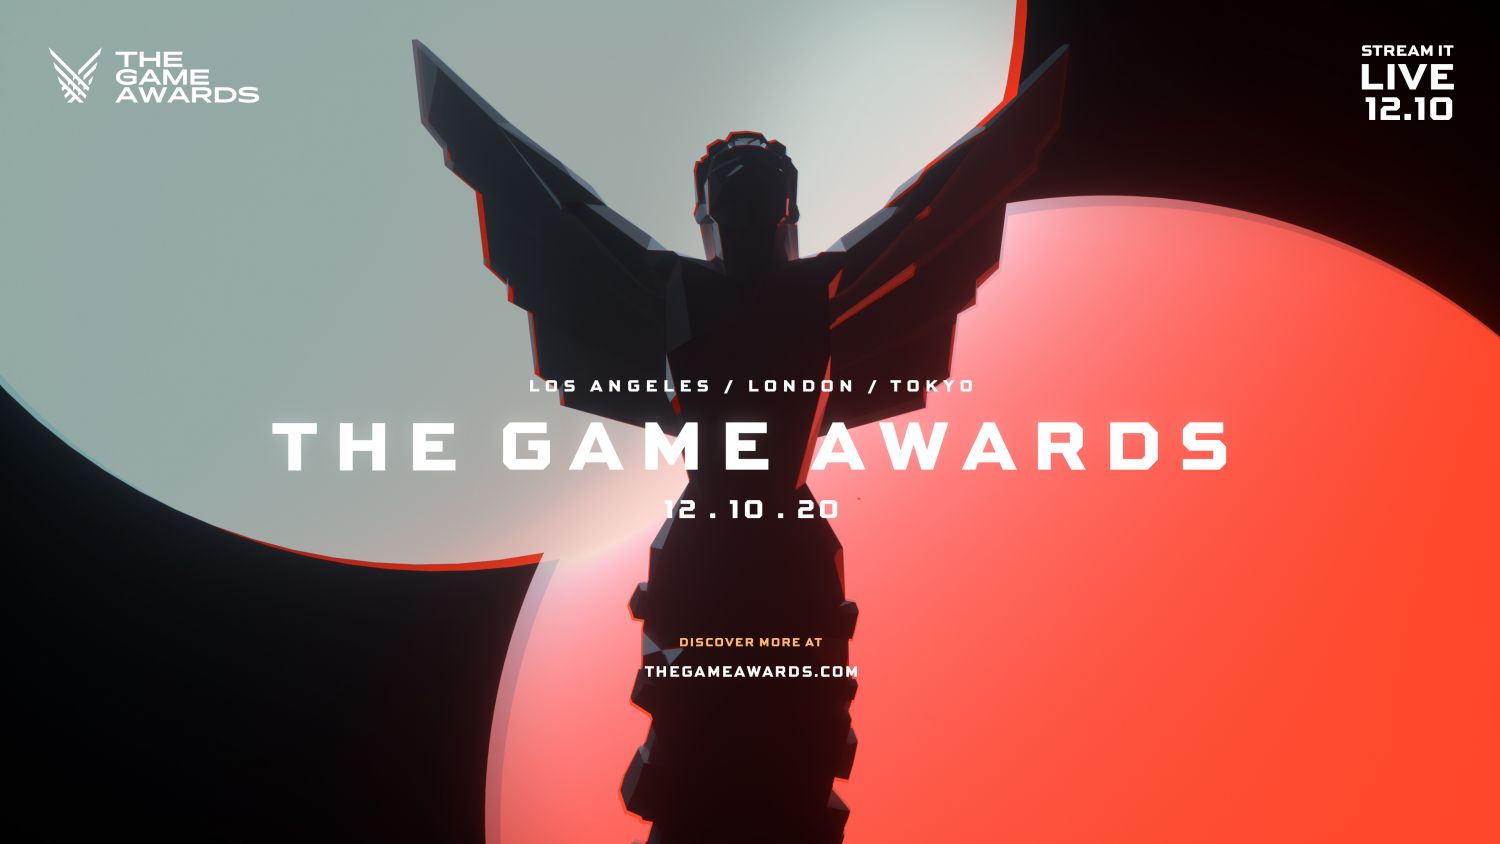 The Game Awards on X: What's your most anticipated game? - Elden Ring -  Halo Infinite - Horizon Forbidden West - God of War Sequel - Resident Evil  Village - Zelda: Breath